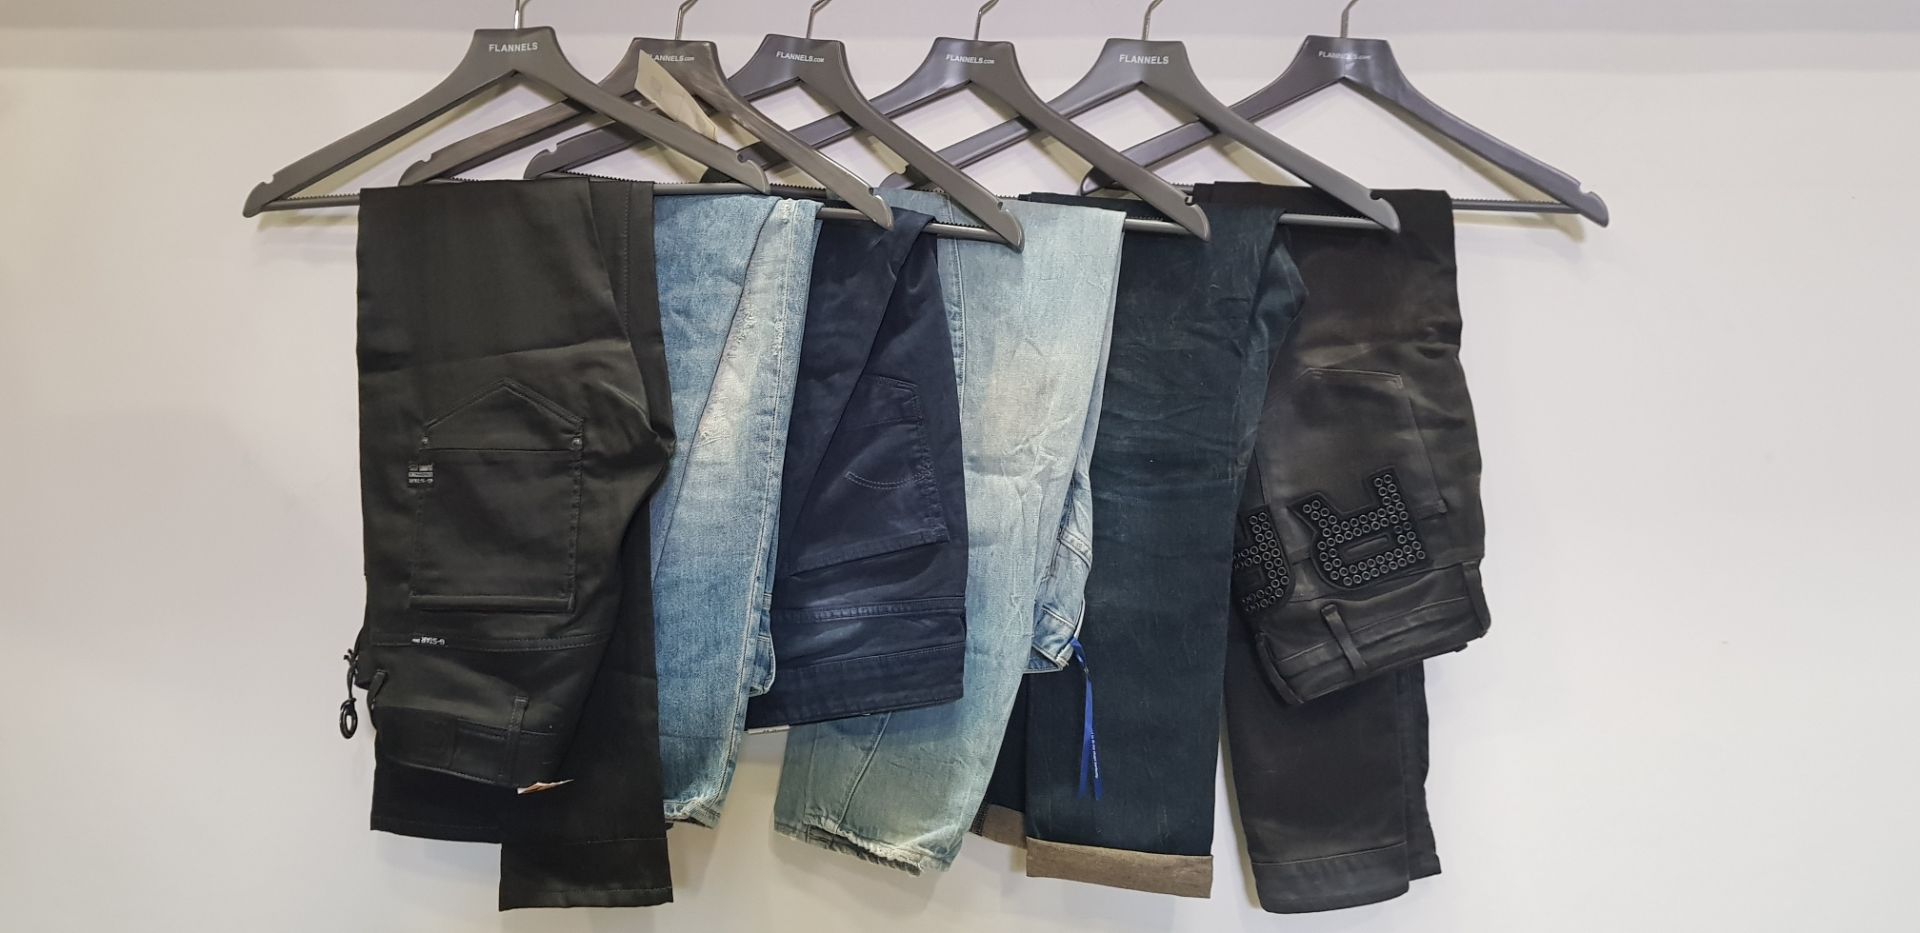 6 X BRAND NEW G-STAR RAW JEANS IN VARIOUS COLOURS (SIZE 26)